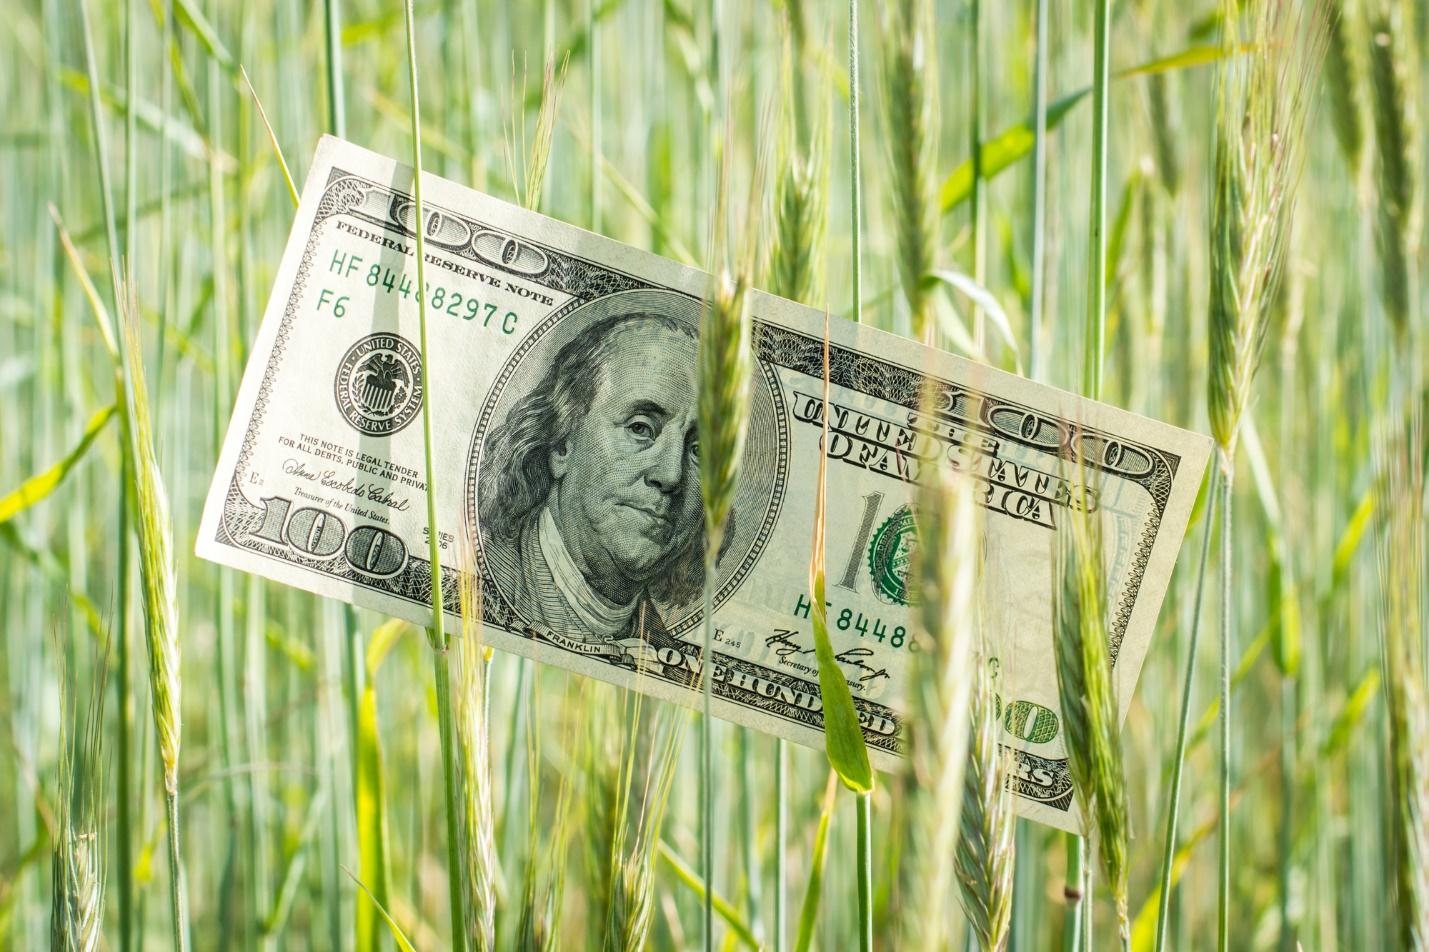 A dollar bill in a field of wheat

Description automatically generated